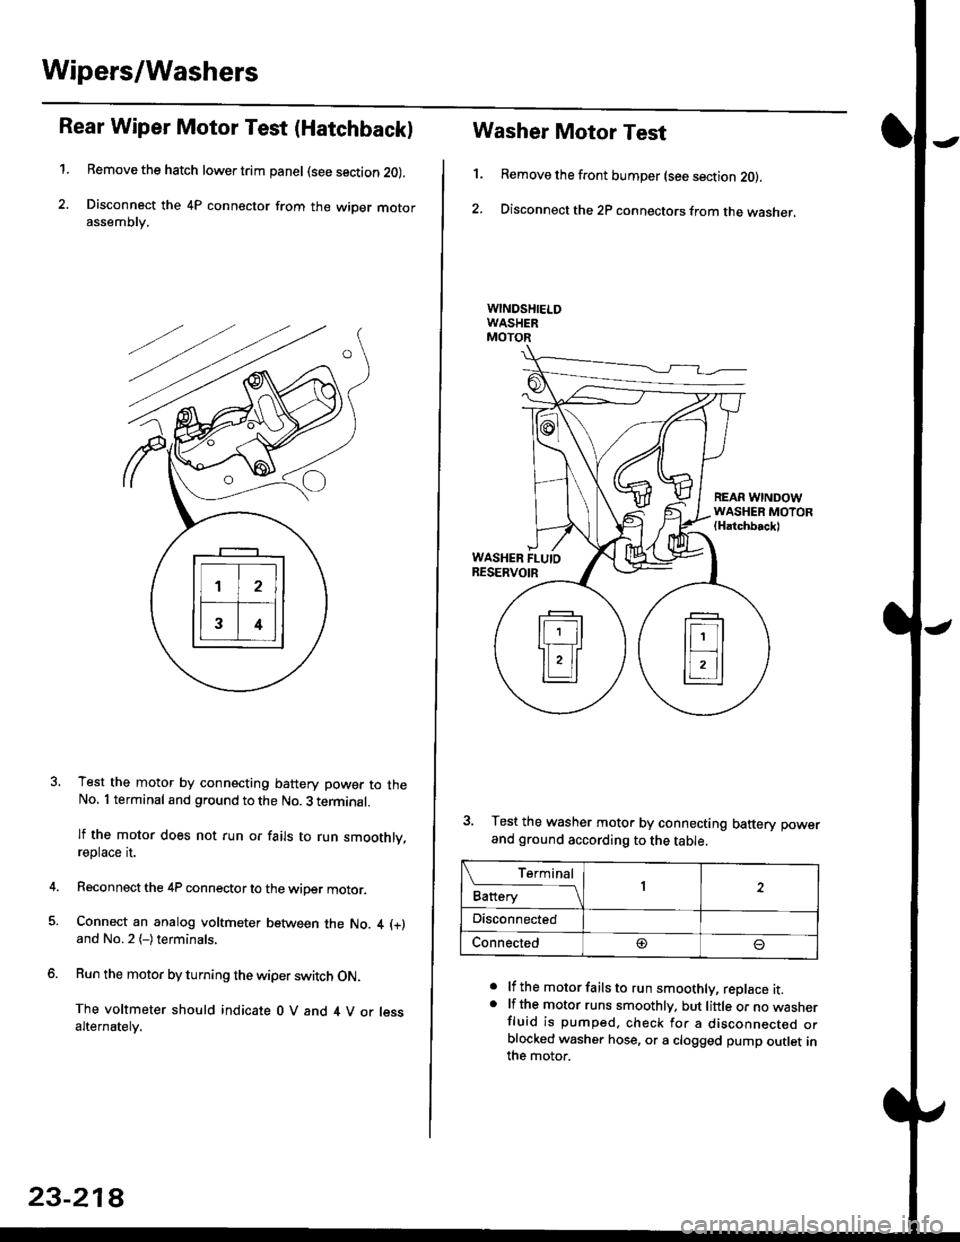 HONDA CIVIC 1996 6.G Workshop Manual Wipers/Washers
Rear Wiper Motor Test (Hatchback)
1.Remove the hatch lower trim panel (see section 20).
Disconnect the 4P connector from the wiper motorassemDry,
Test the motor by connecting battery po